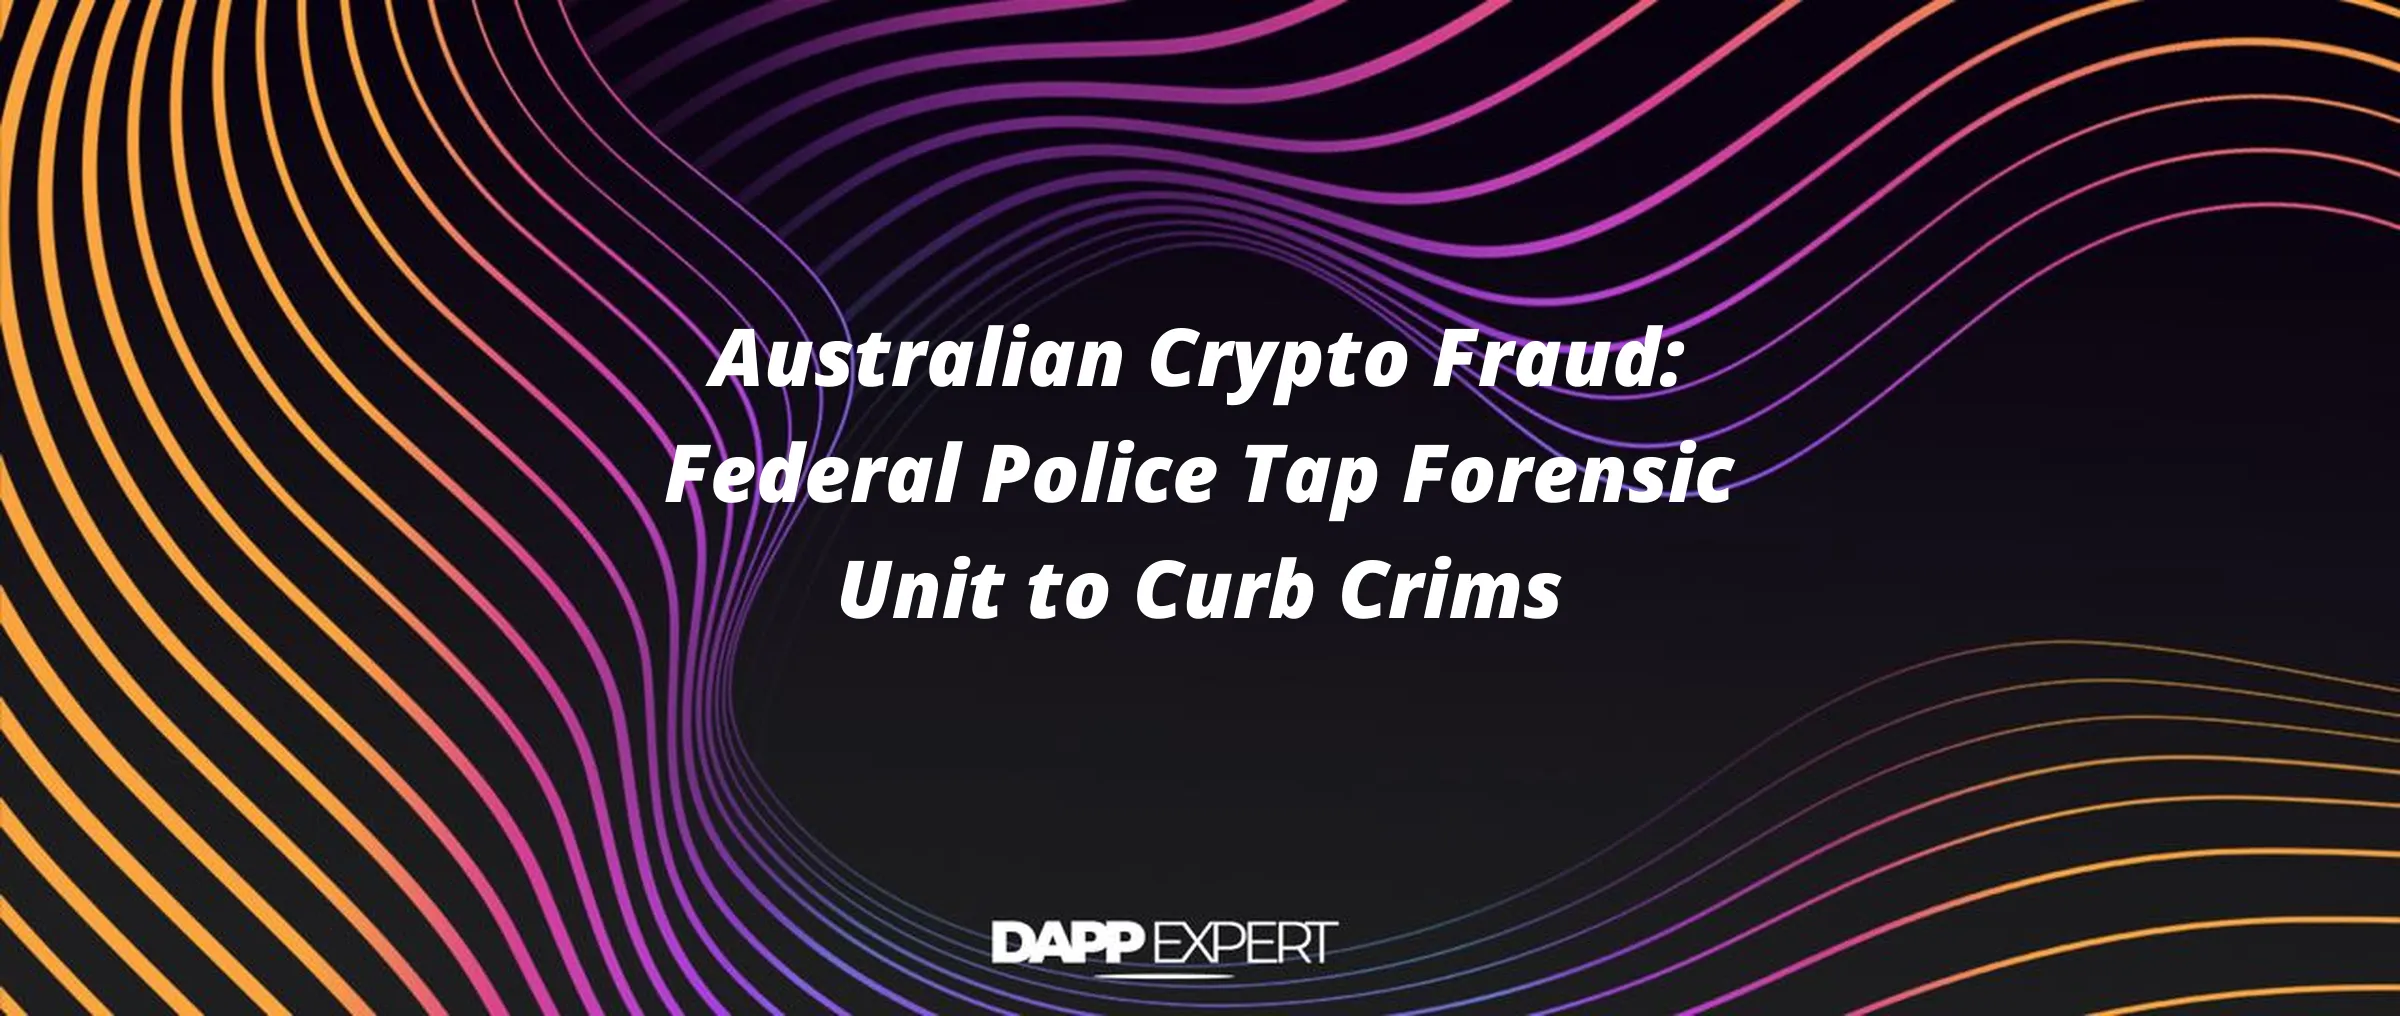 Australian Crypto Fraud: Federal Police Tap Forensic Unit to Curb Crims